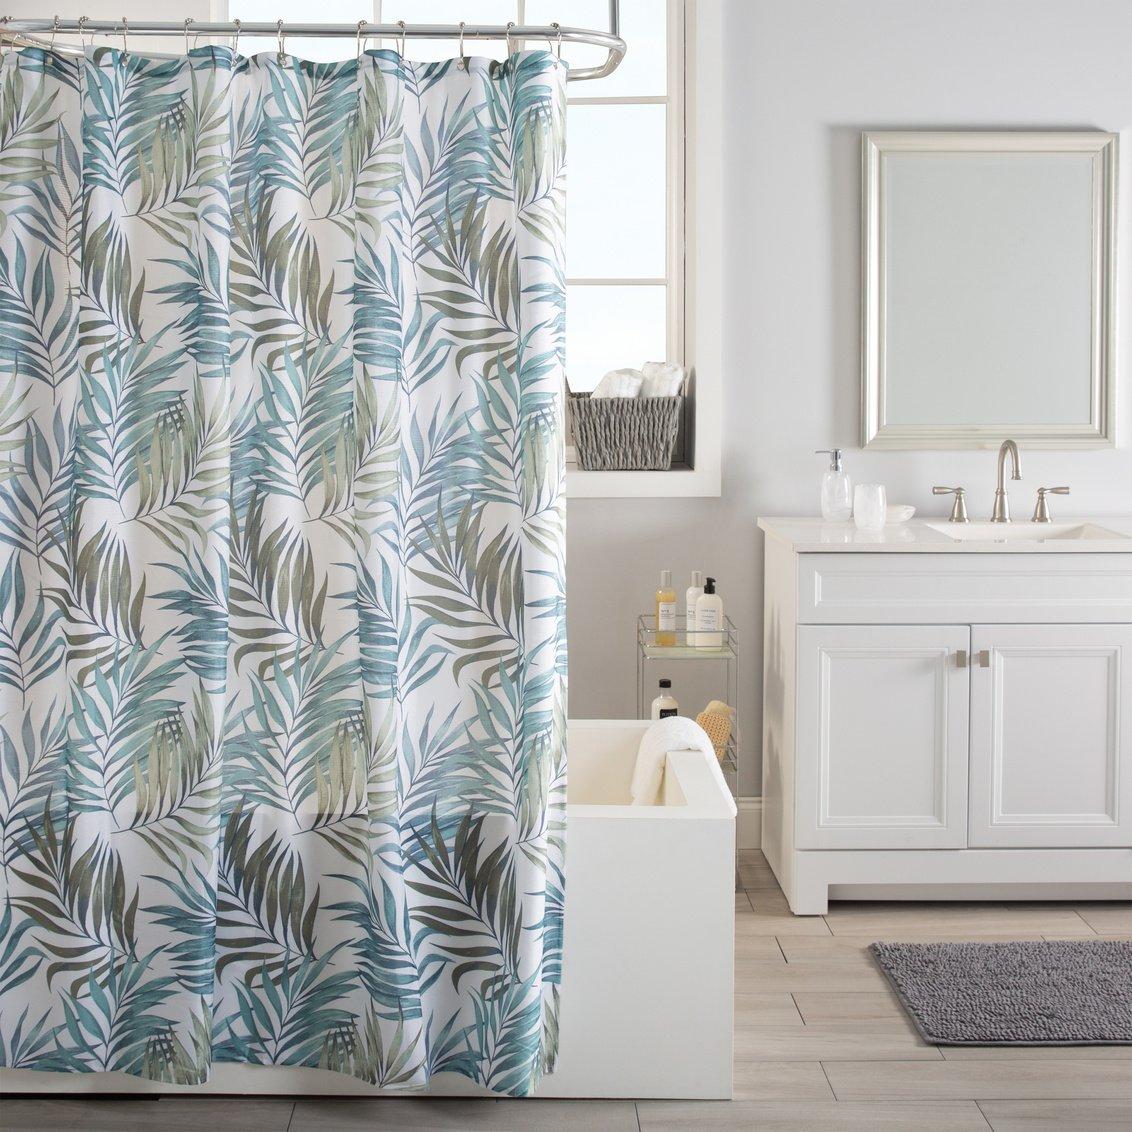 Photos - Other sanitary accessories Key Largo Shower Curtain